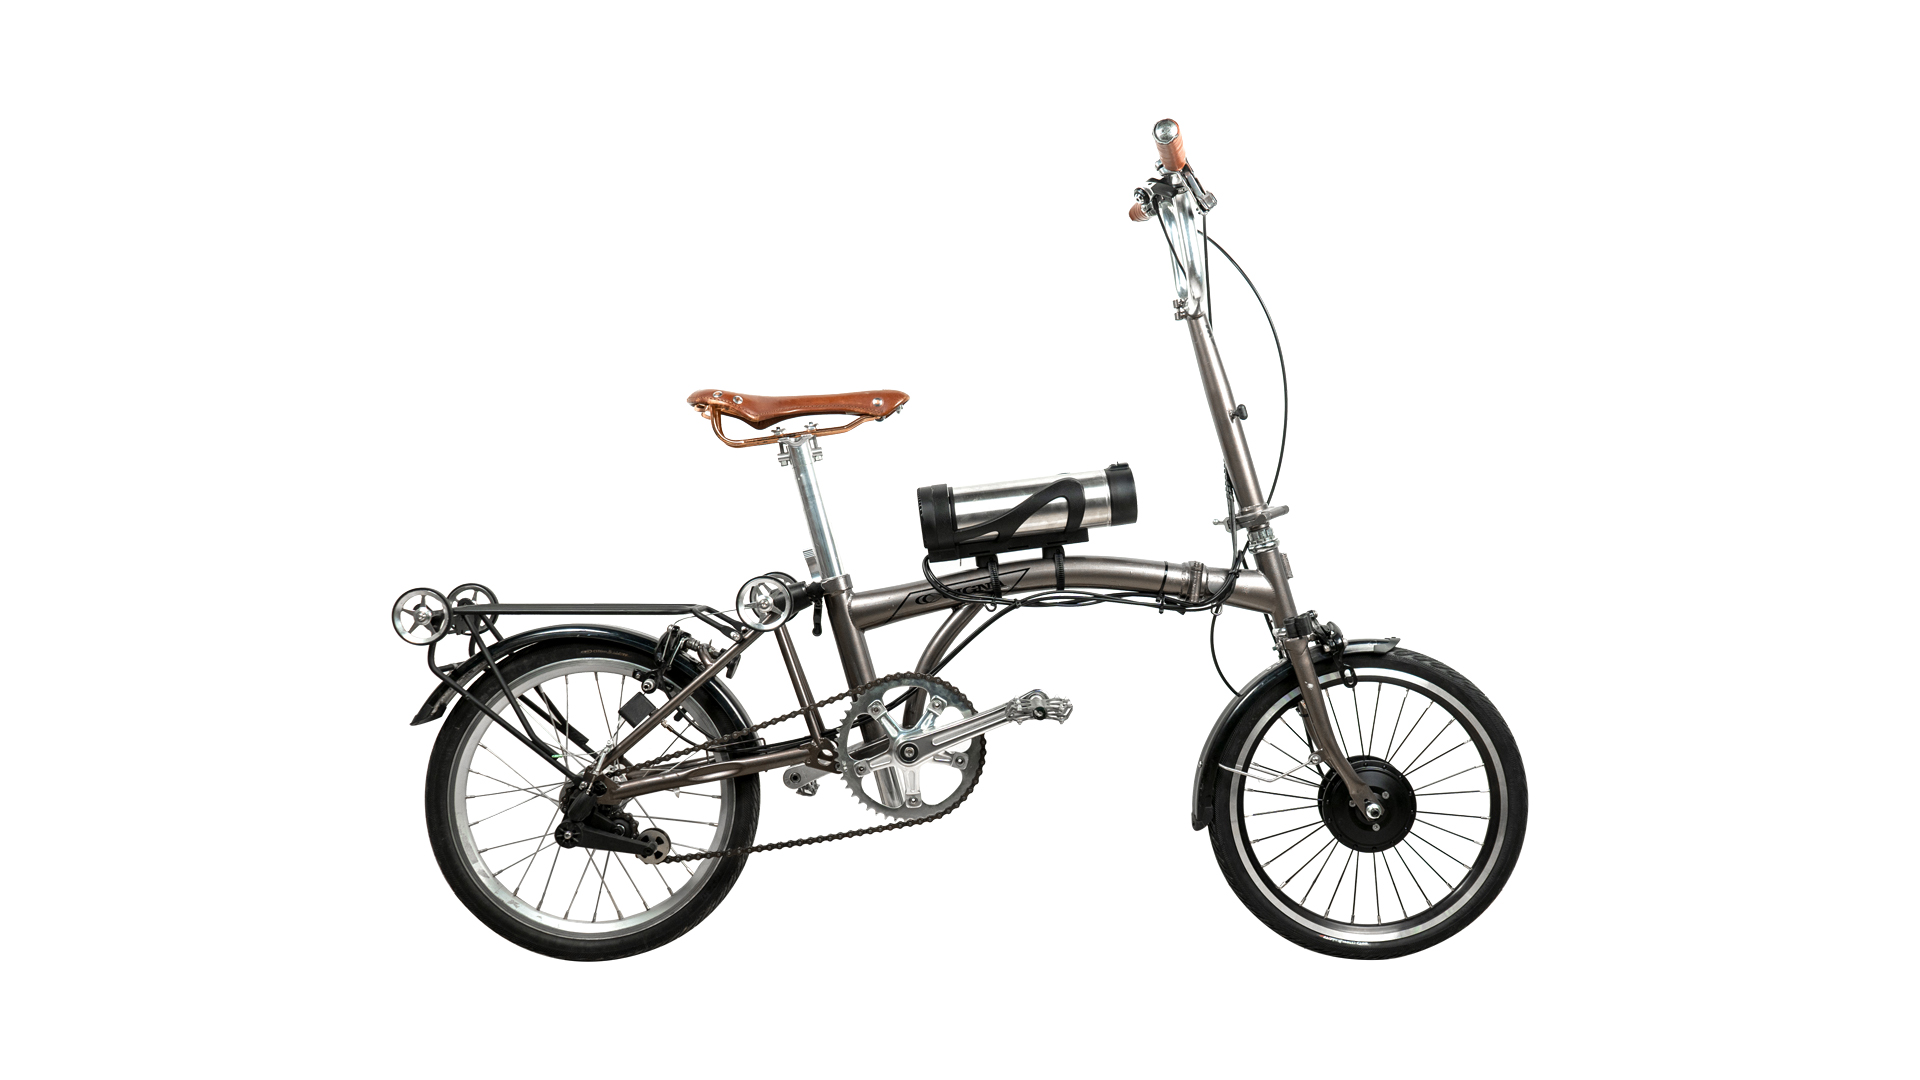 How can beginners choose their first Brompton?